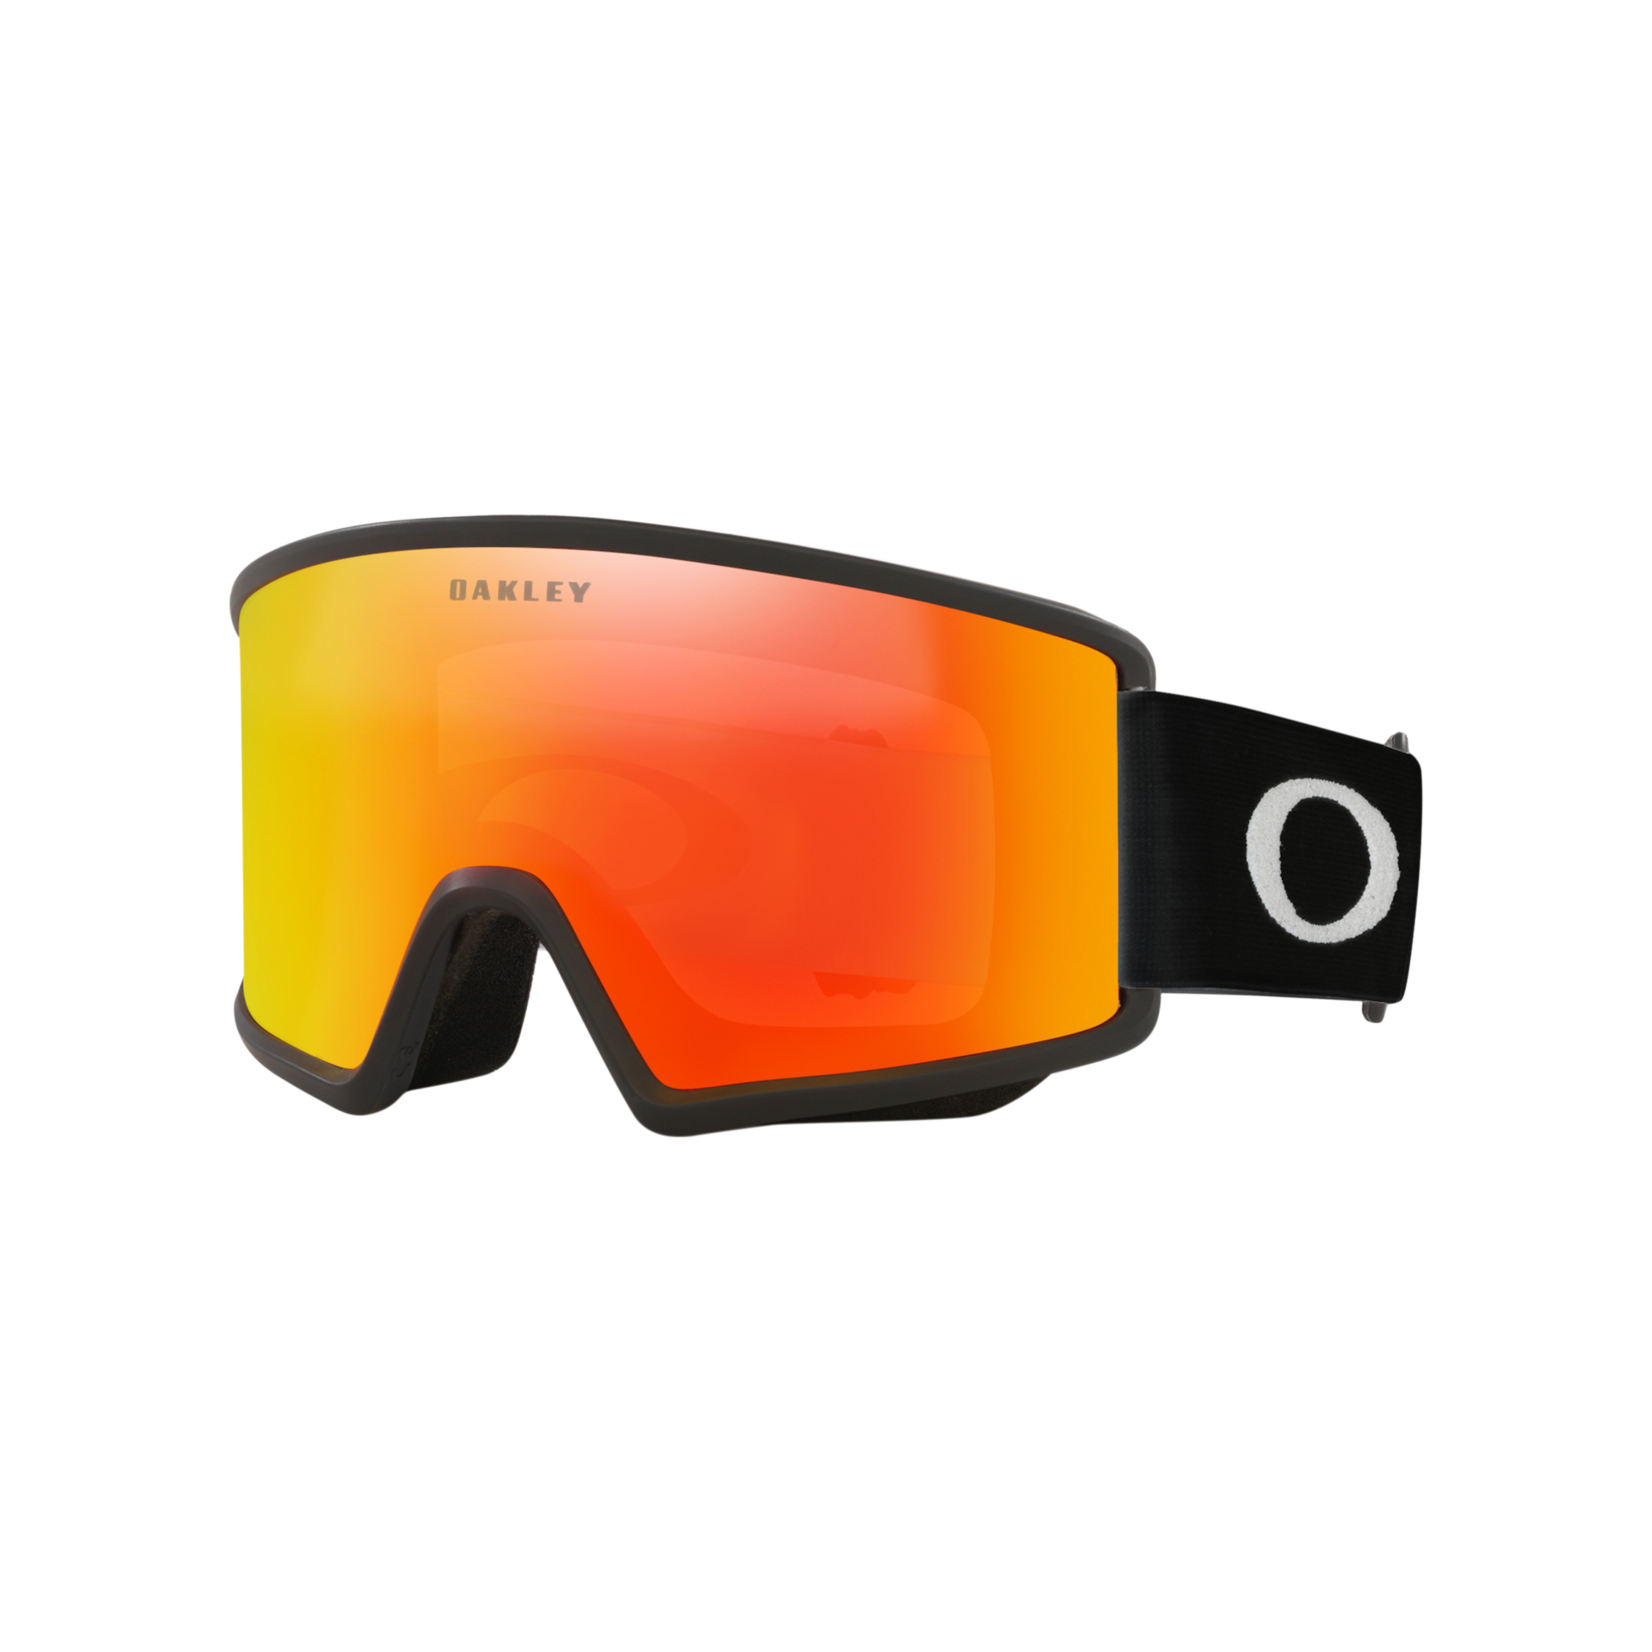 Oakley Oakley Target Line M Snow Goggles w/ Spare Lens